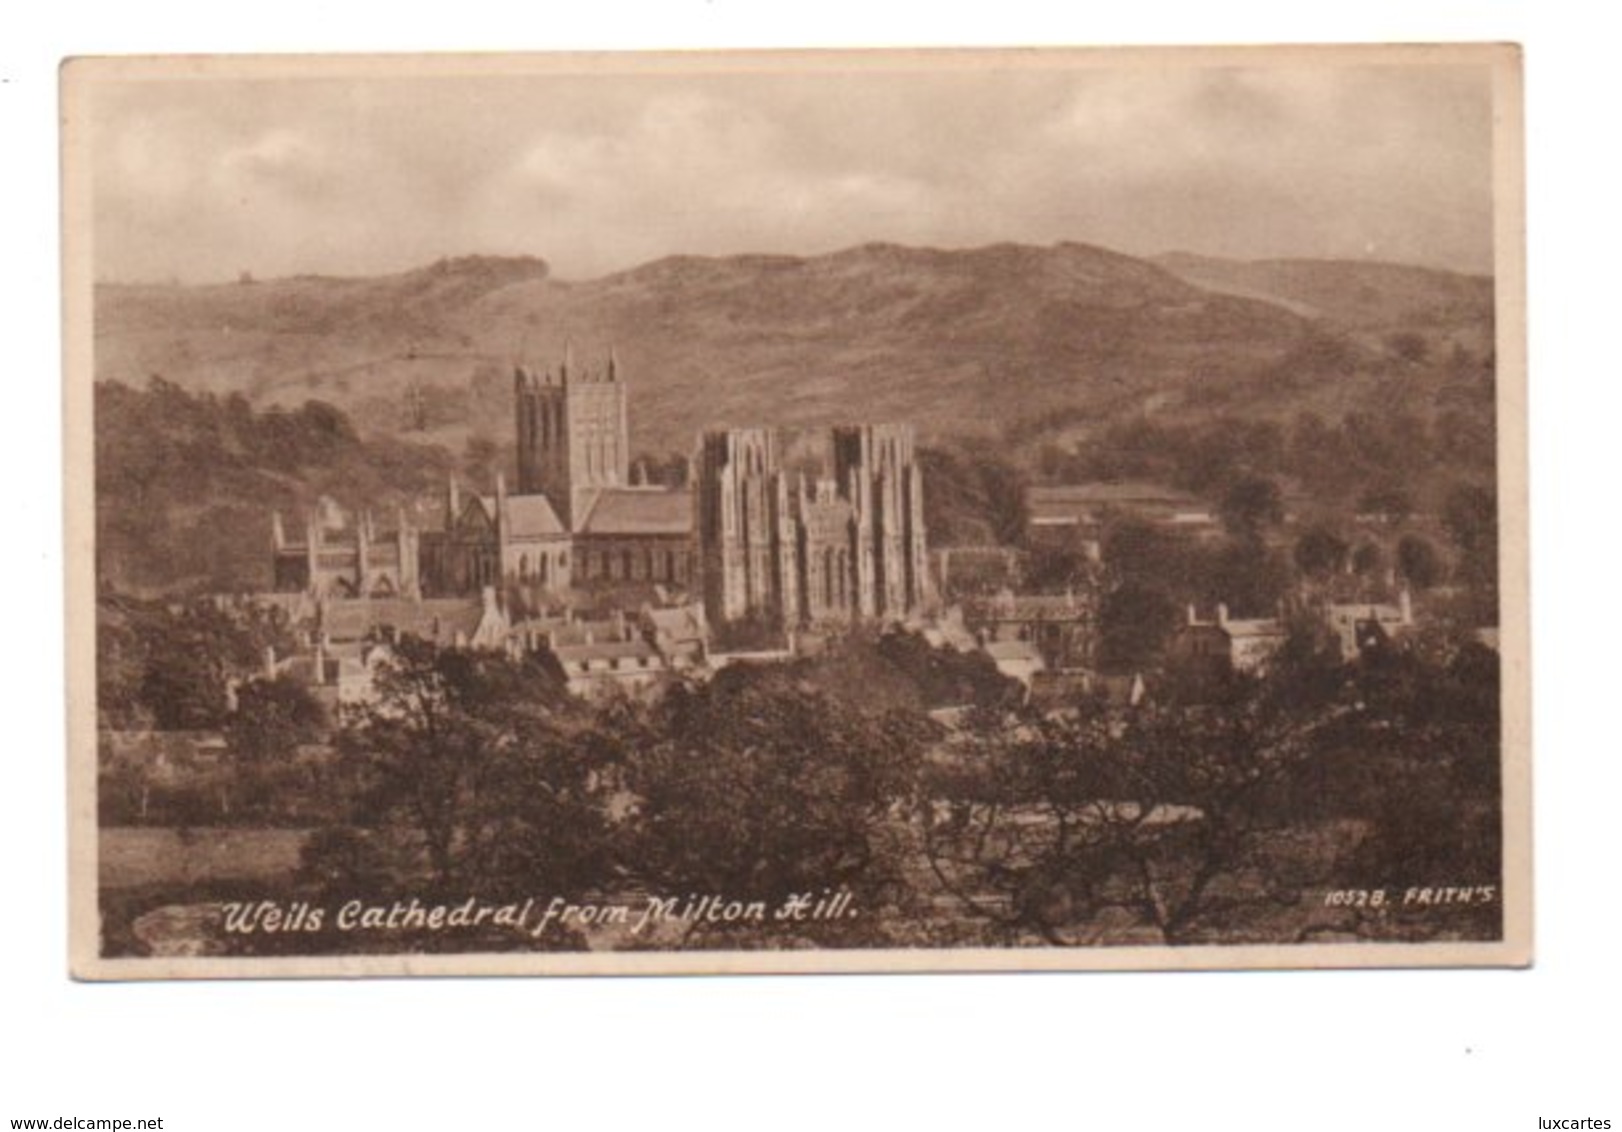 WELLS CATHEDRAL FROM MILTON HILL. - Wells